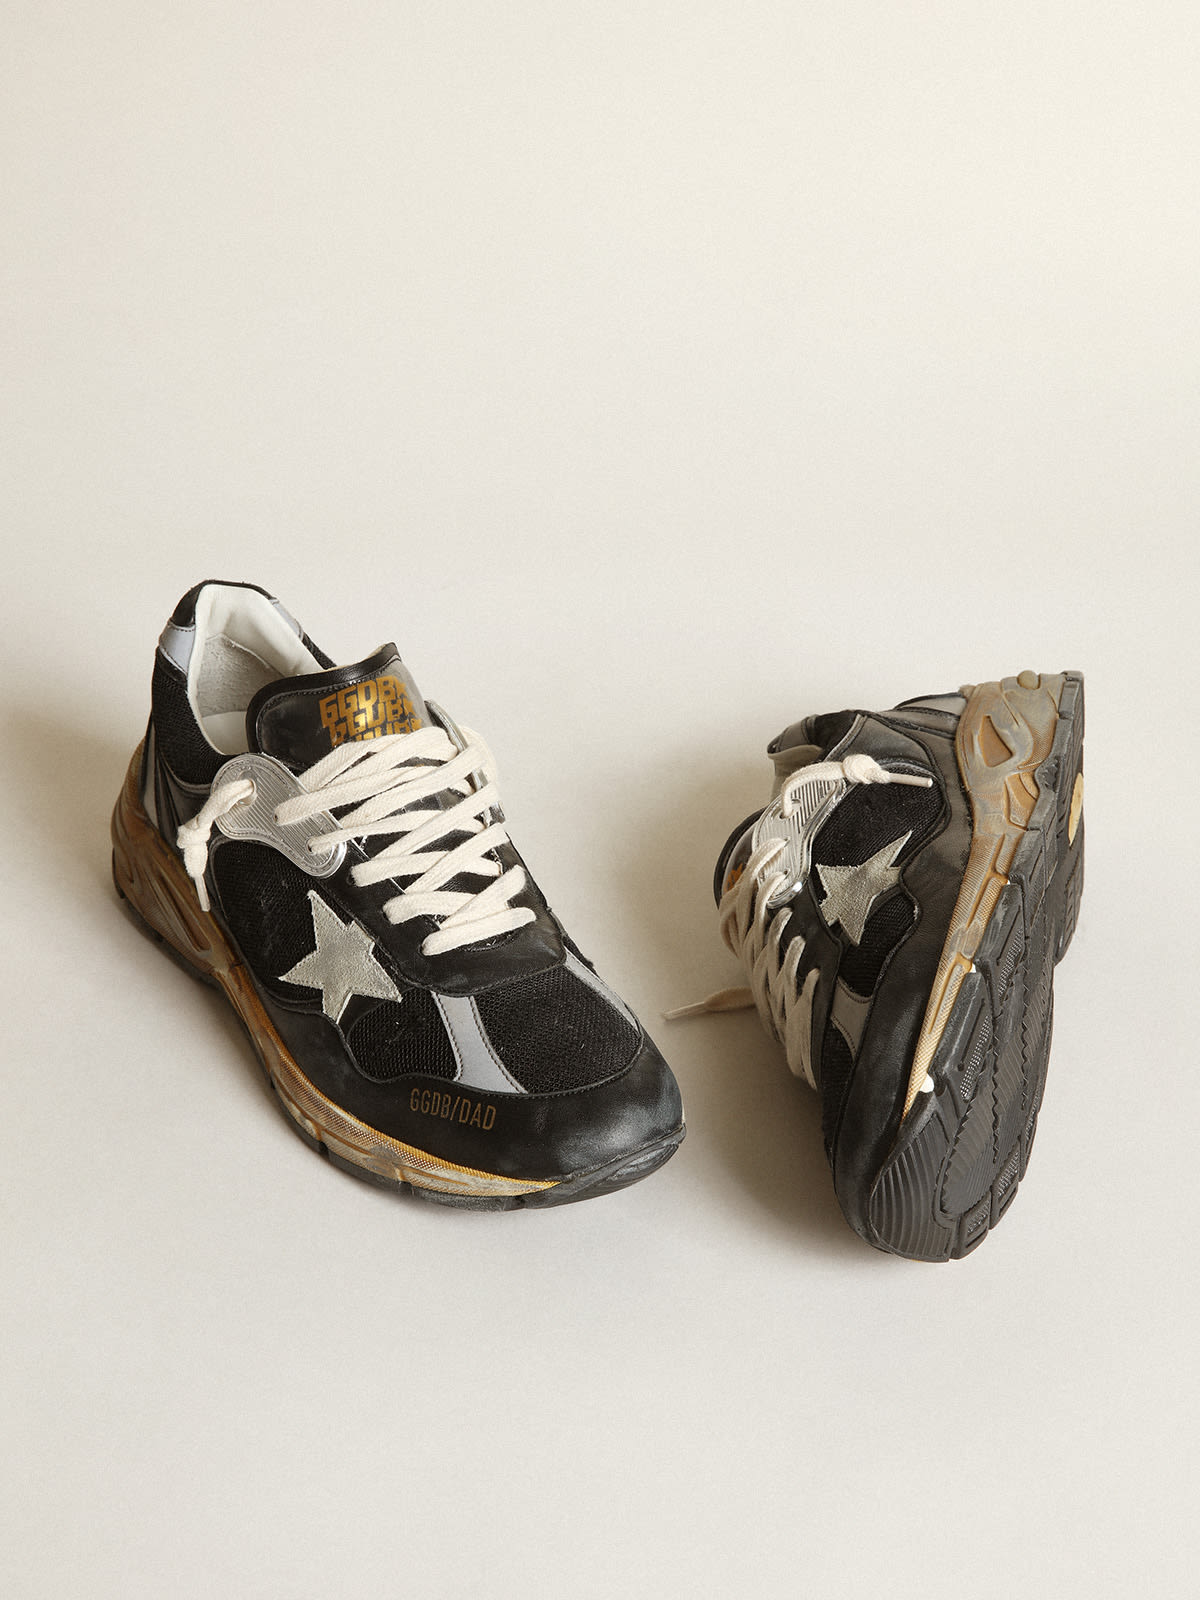 Golden Goose - Men’s Dad-Star sneakers in black mesh and nappa leather with ice-gray suede star in 